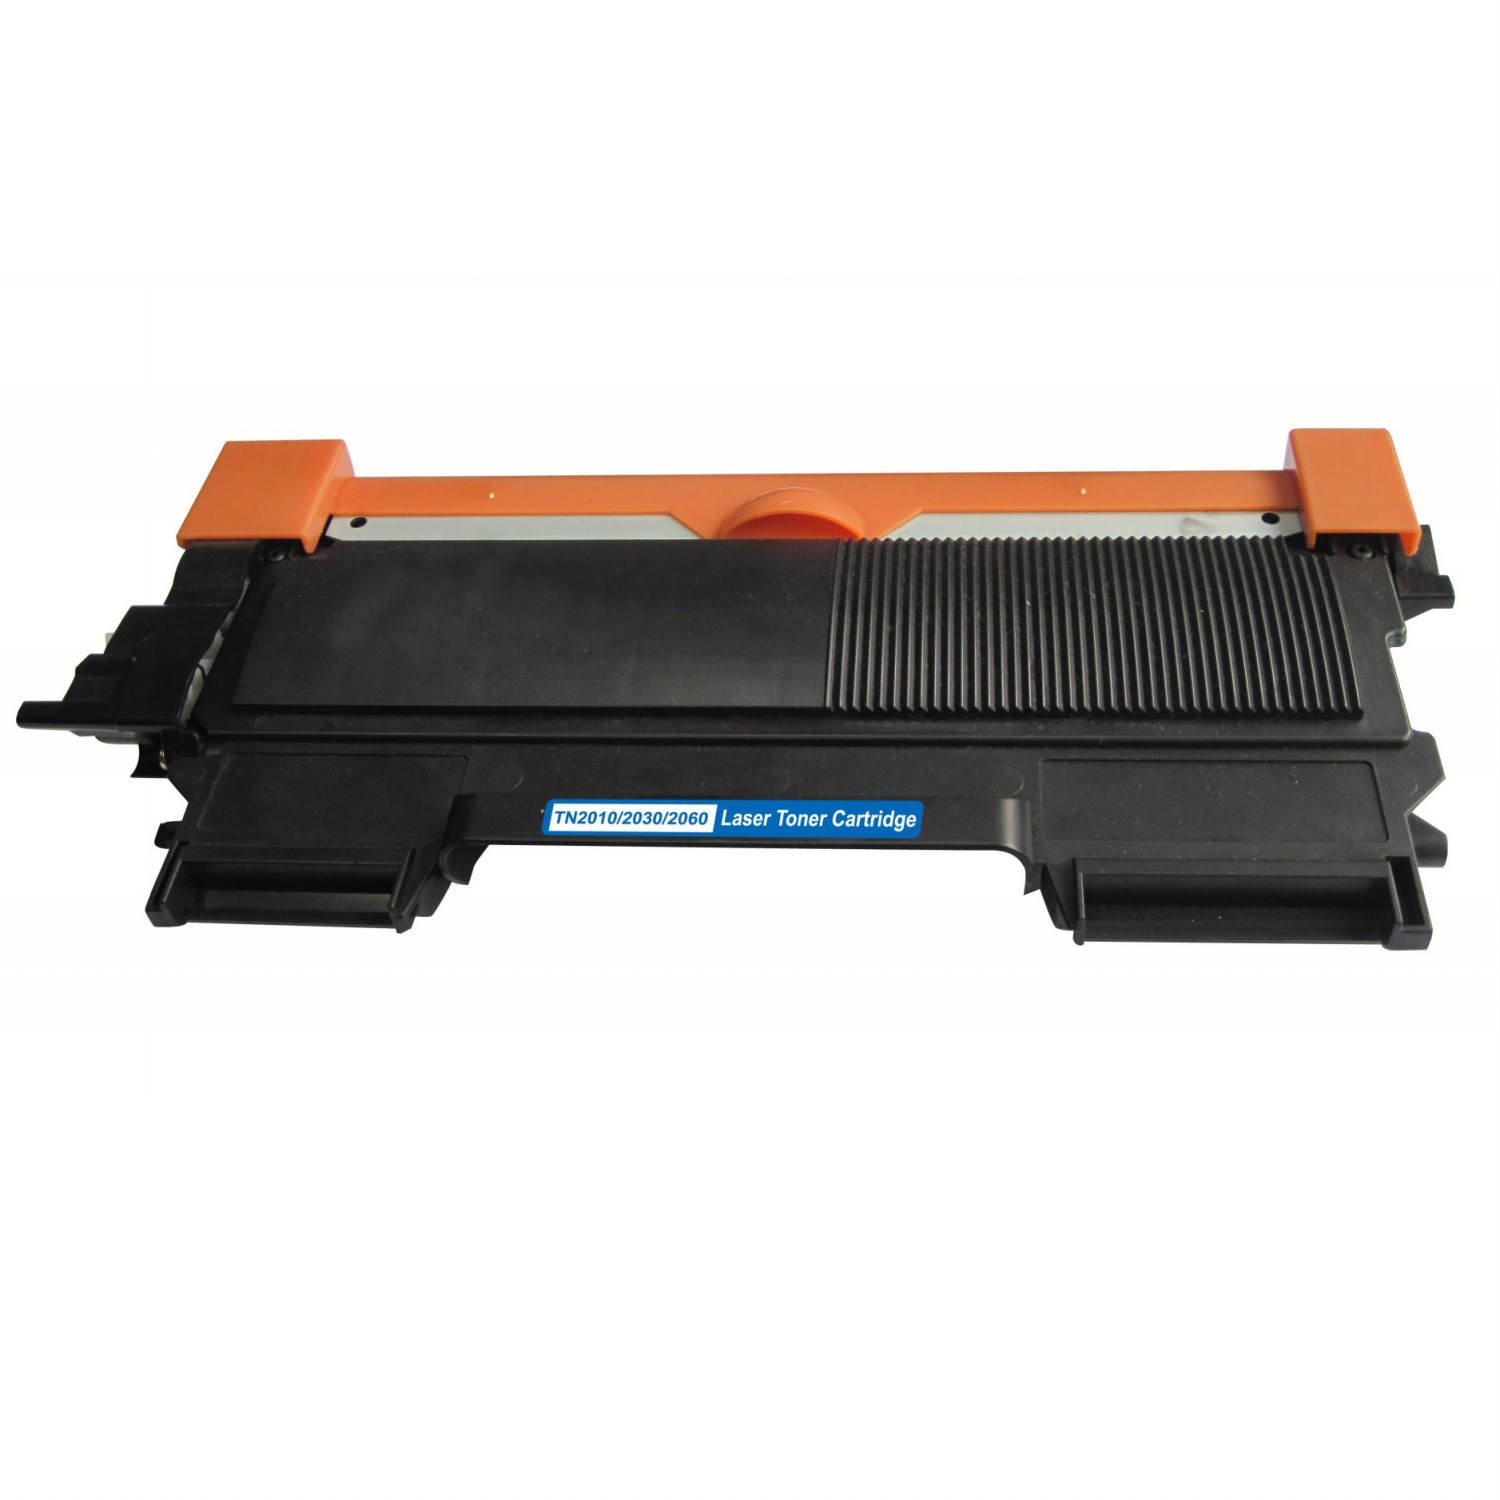 Compatible toner cartridge for Brother TN2010/2030/2060/2080/410/11J